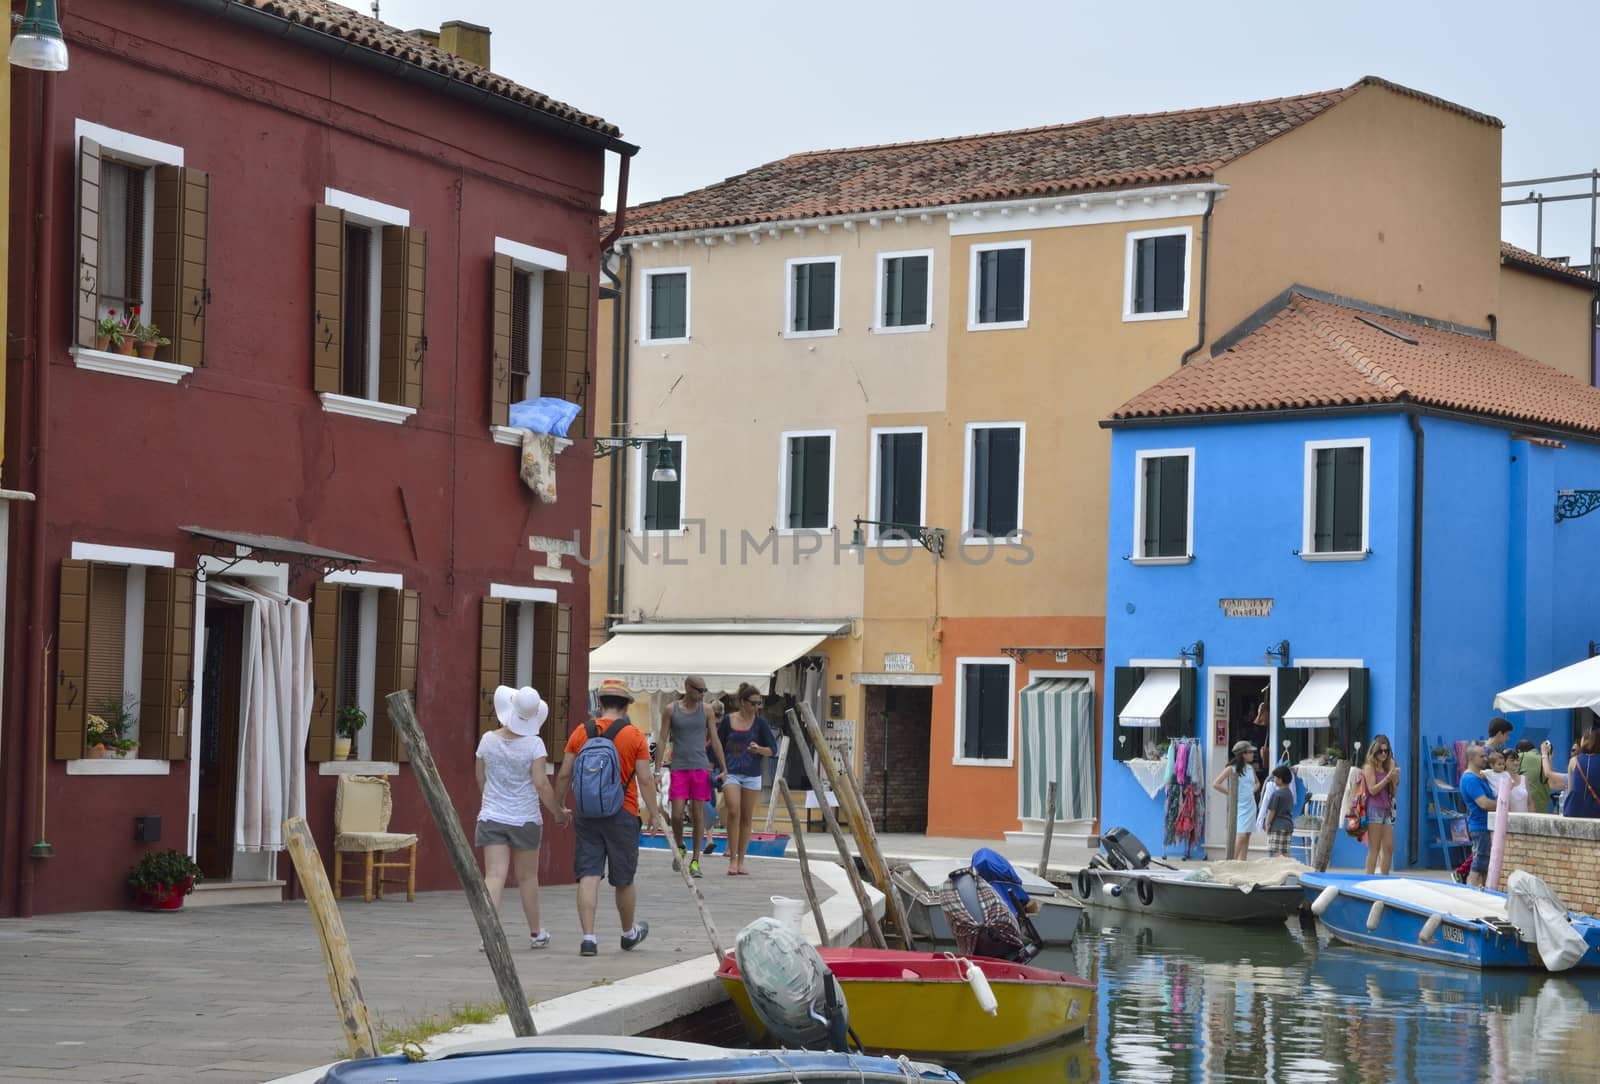 Tourists walking by a way along a small canal in Burano, a colorful island of Venice, Italy